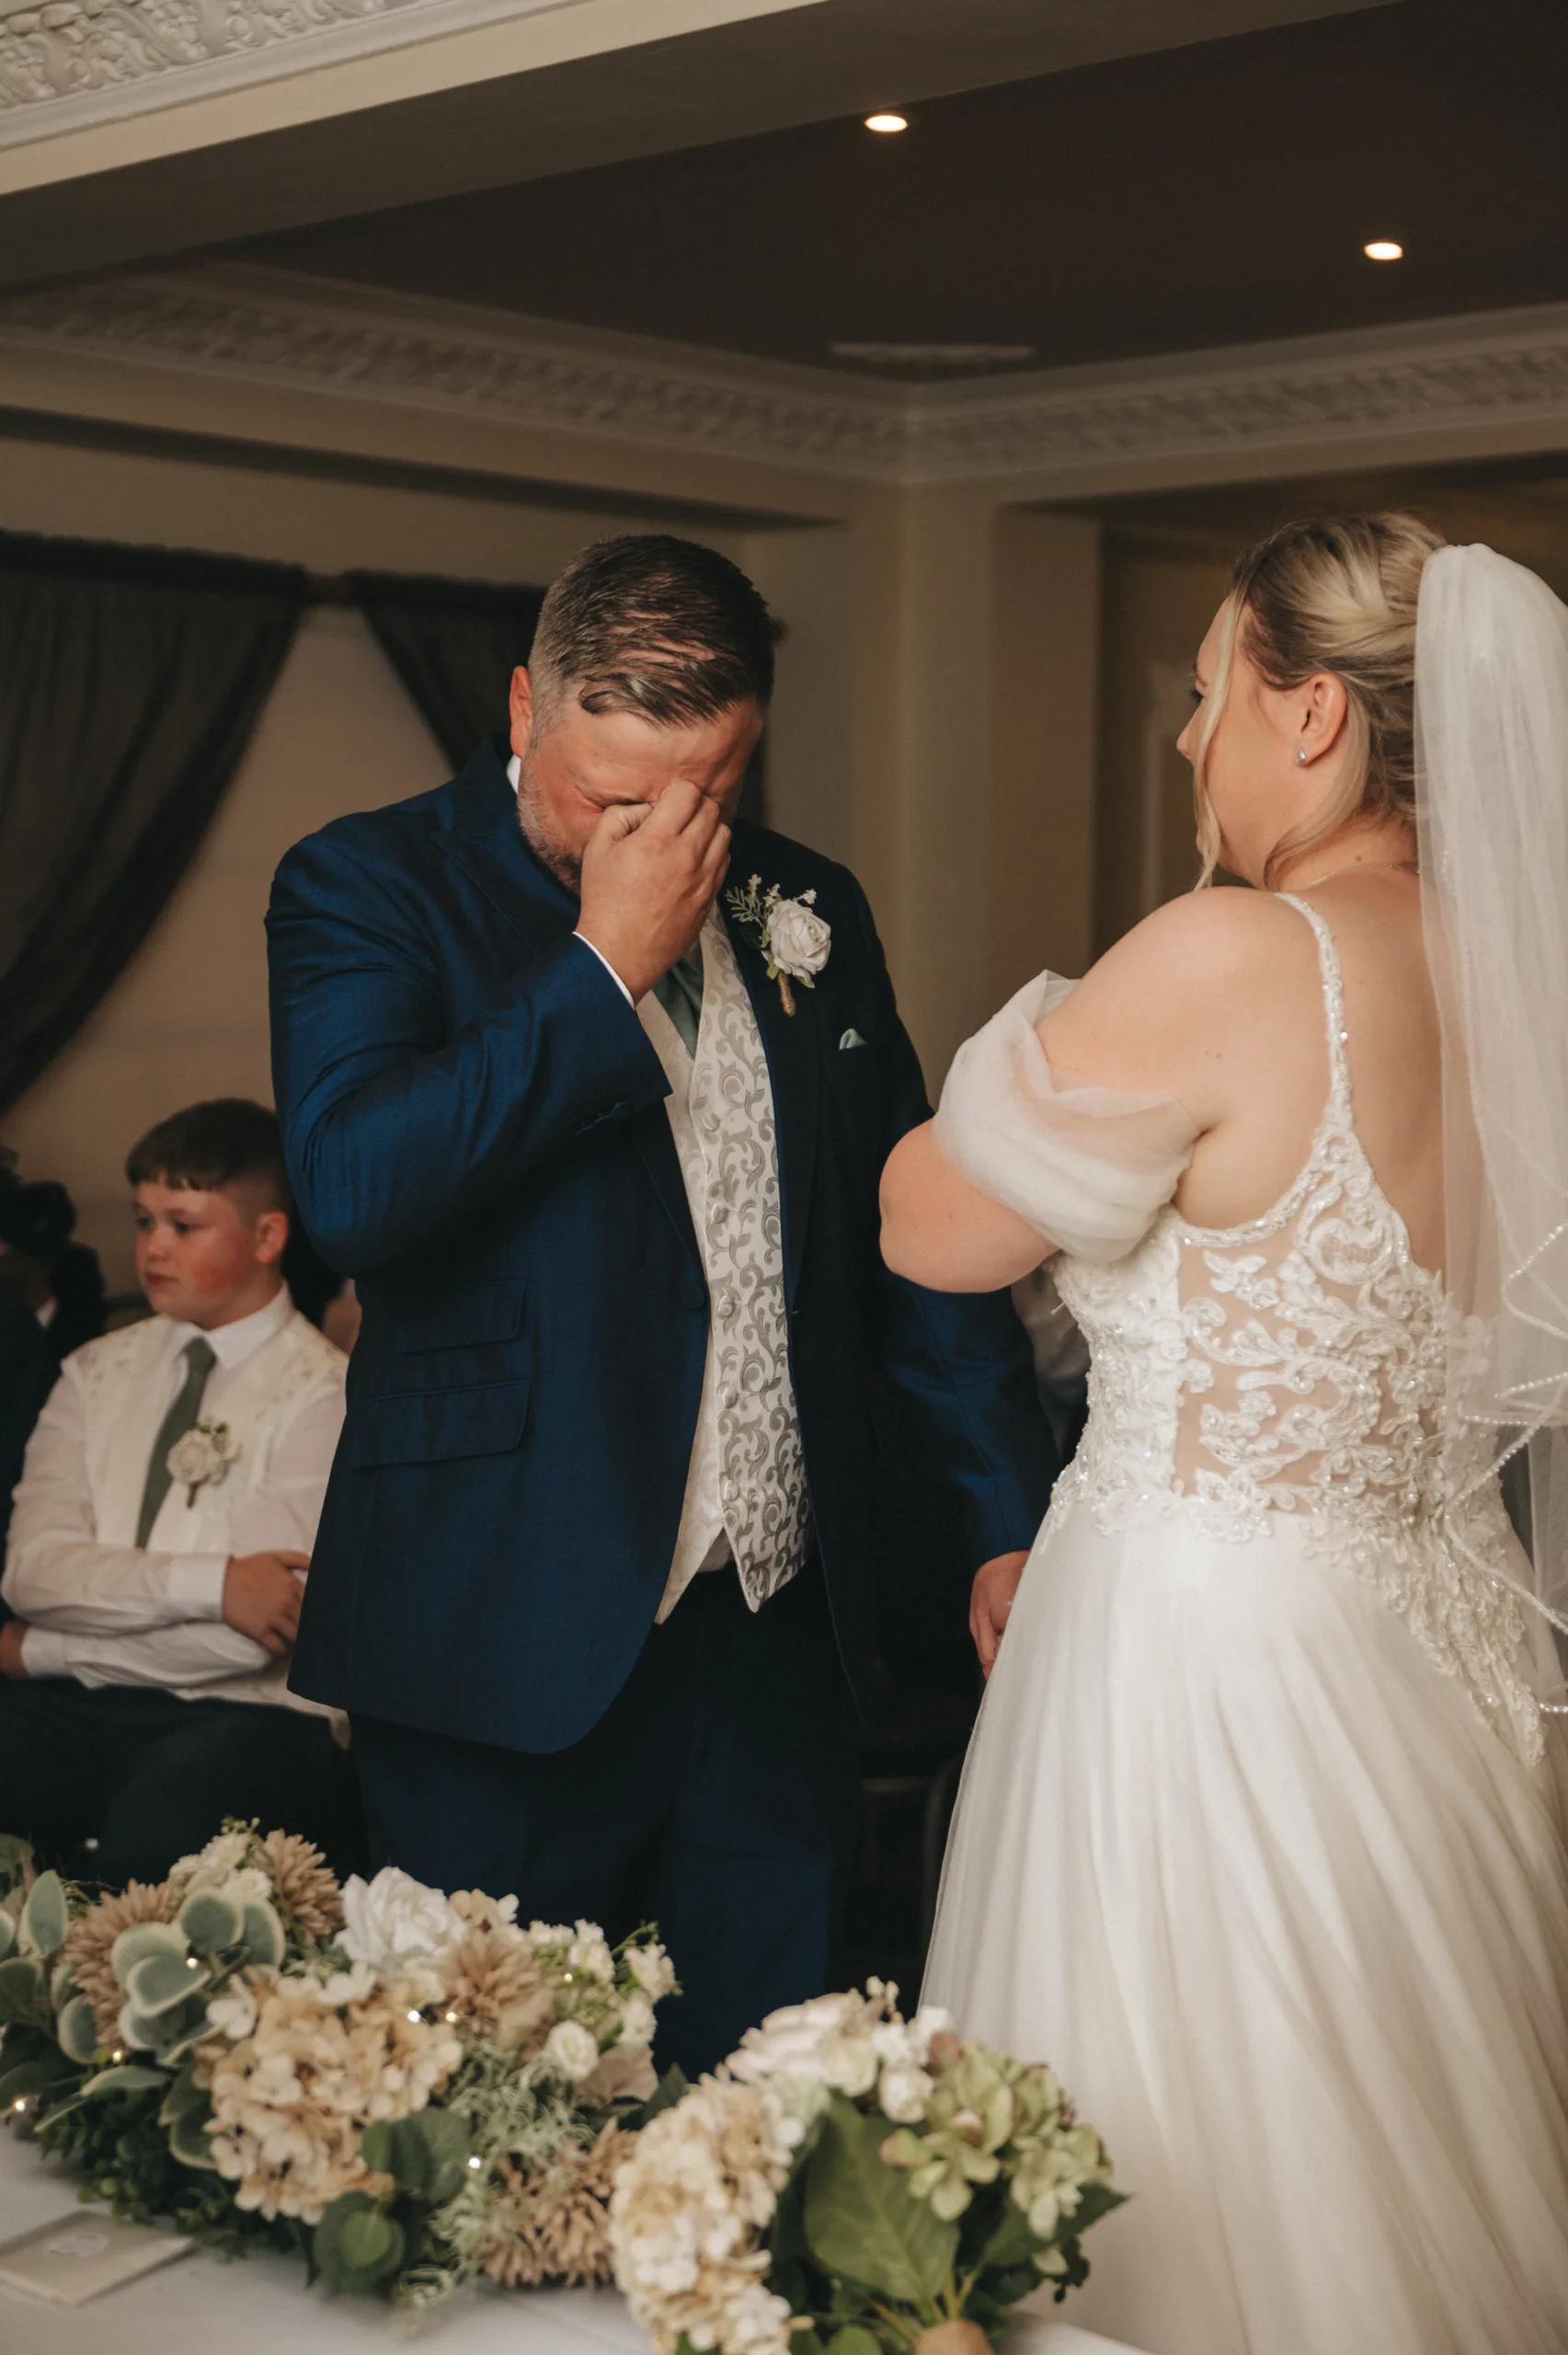 A wedding couple crying during their ceremony in Yorkshire.